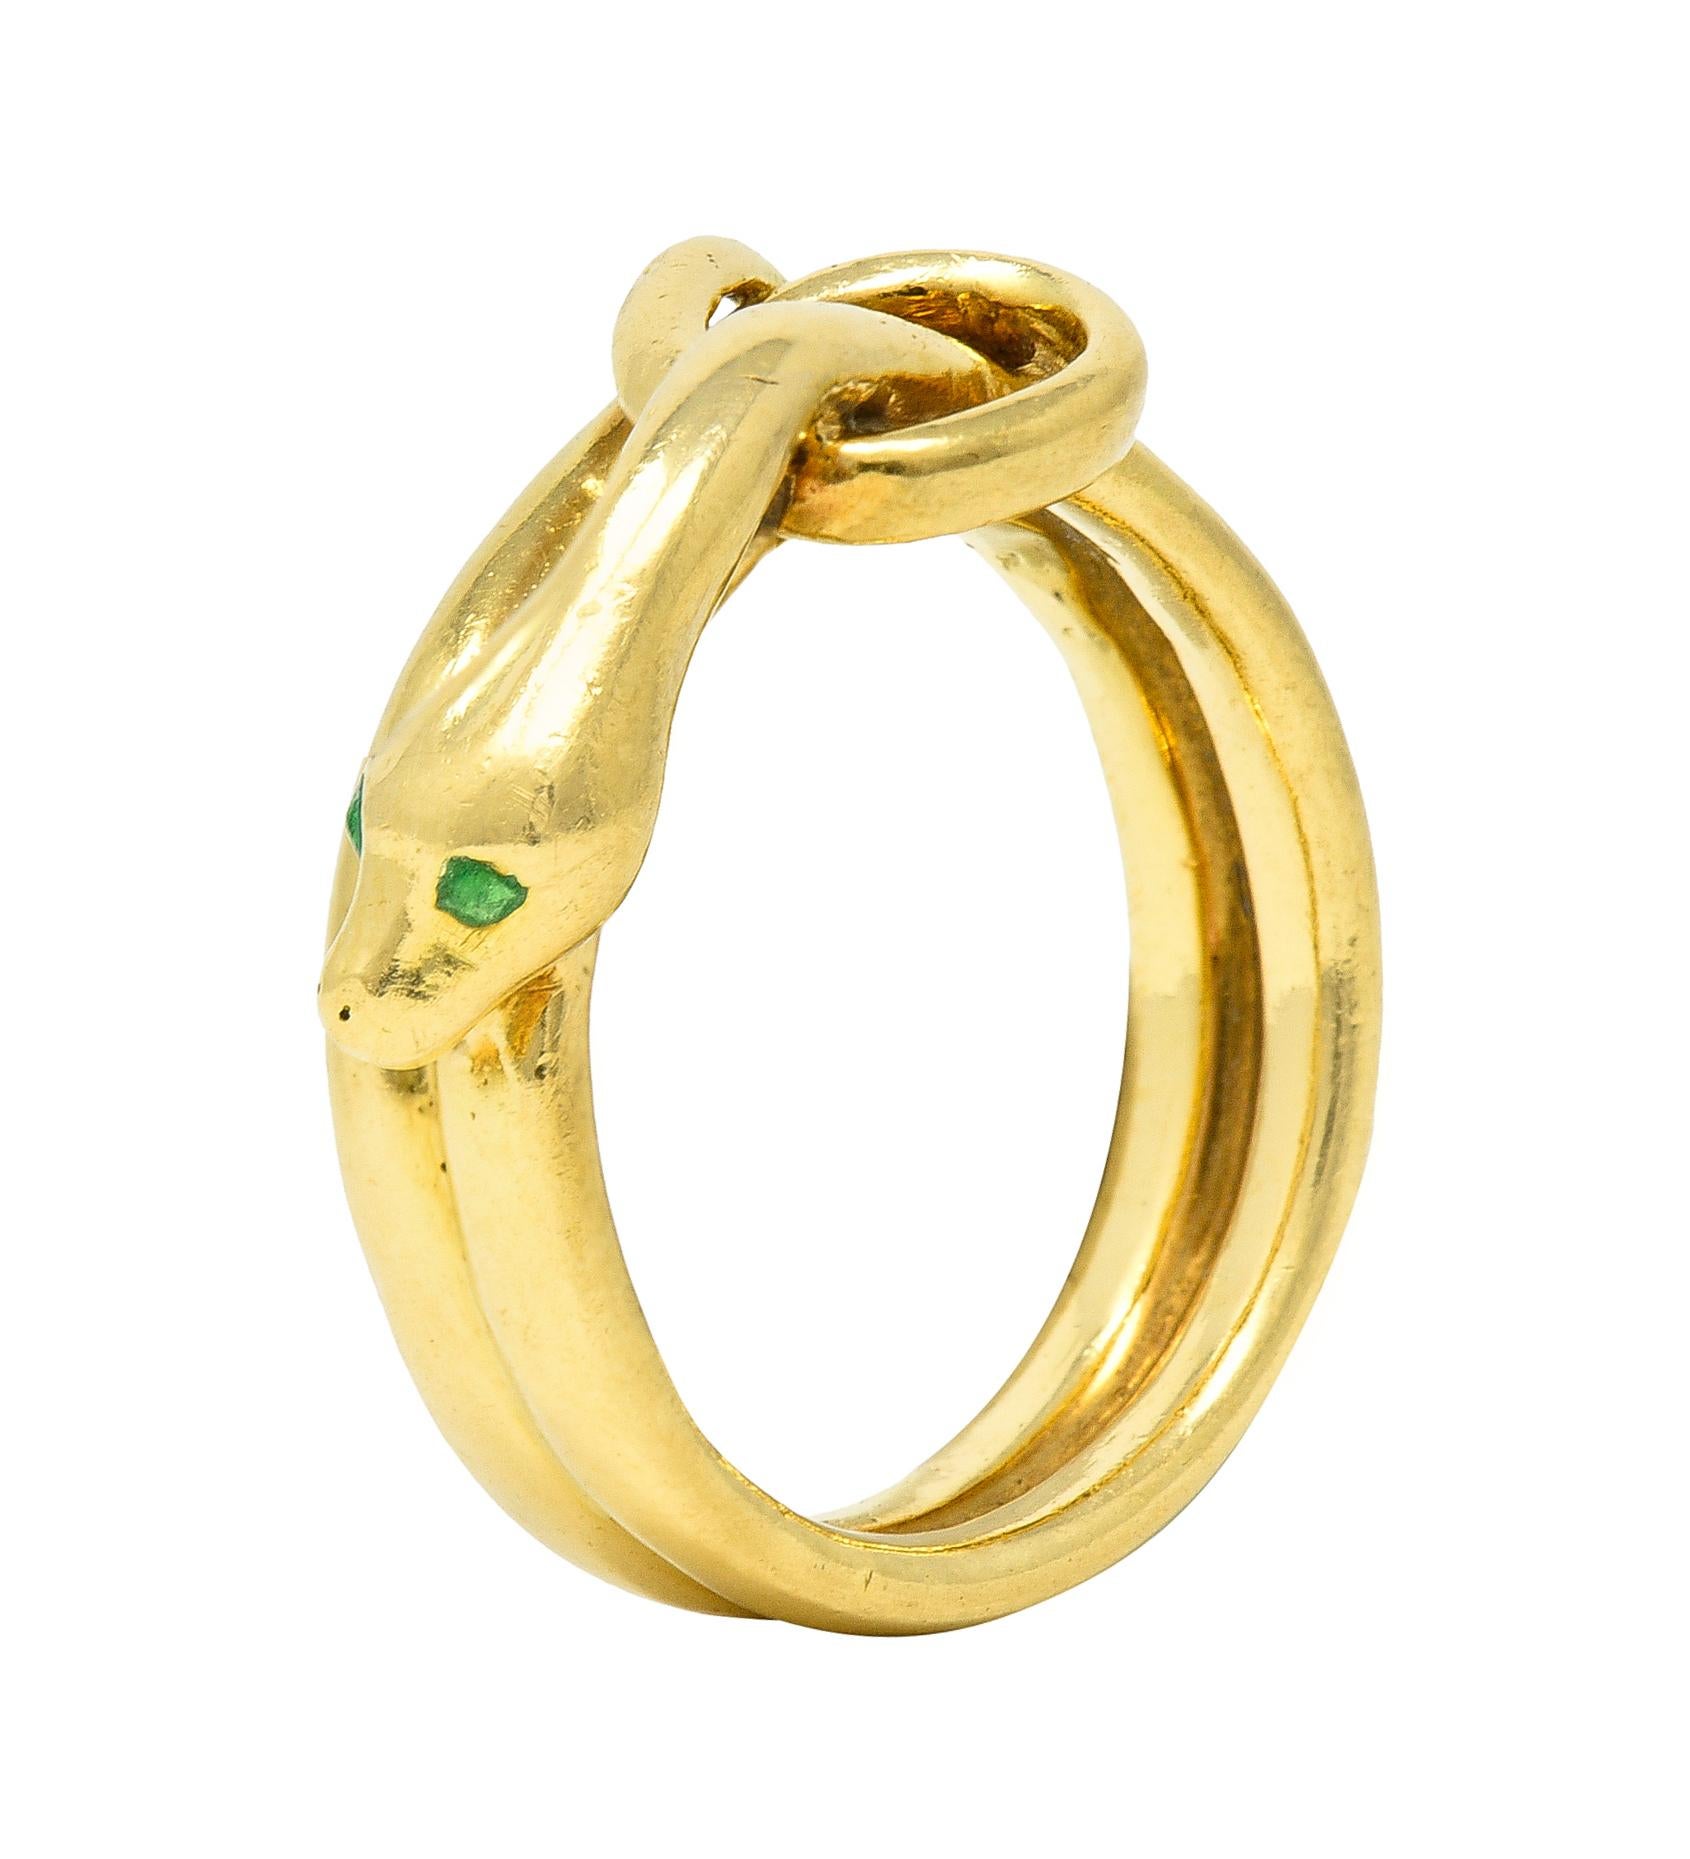 Designed as a coiled snake and terminating with a looped tail and head
Stylized with sleek minimalist features and accented by demantoid garnet eyes
Flush set and transparent bright green in color
Tested with partial stamp for 18-karat gold
Fully